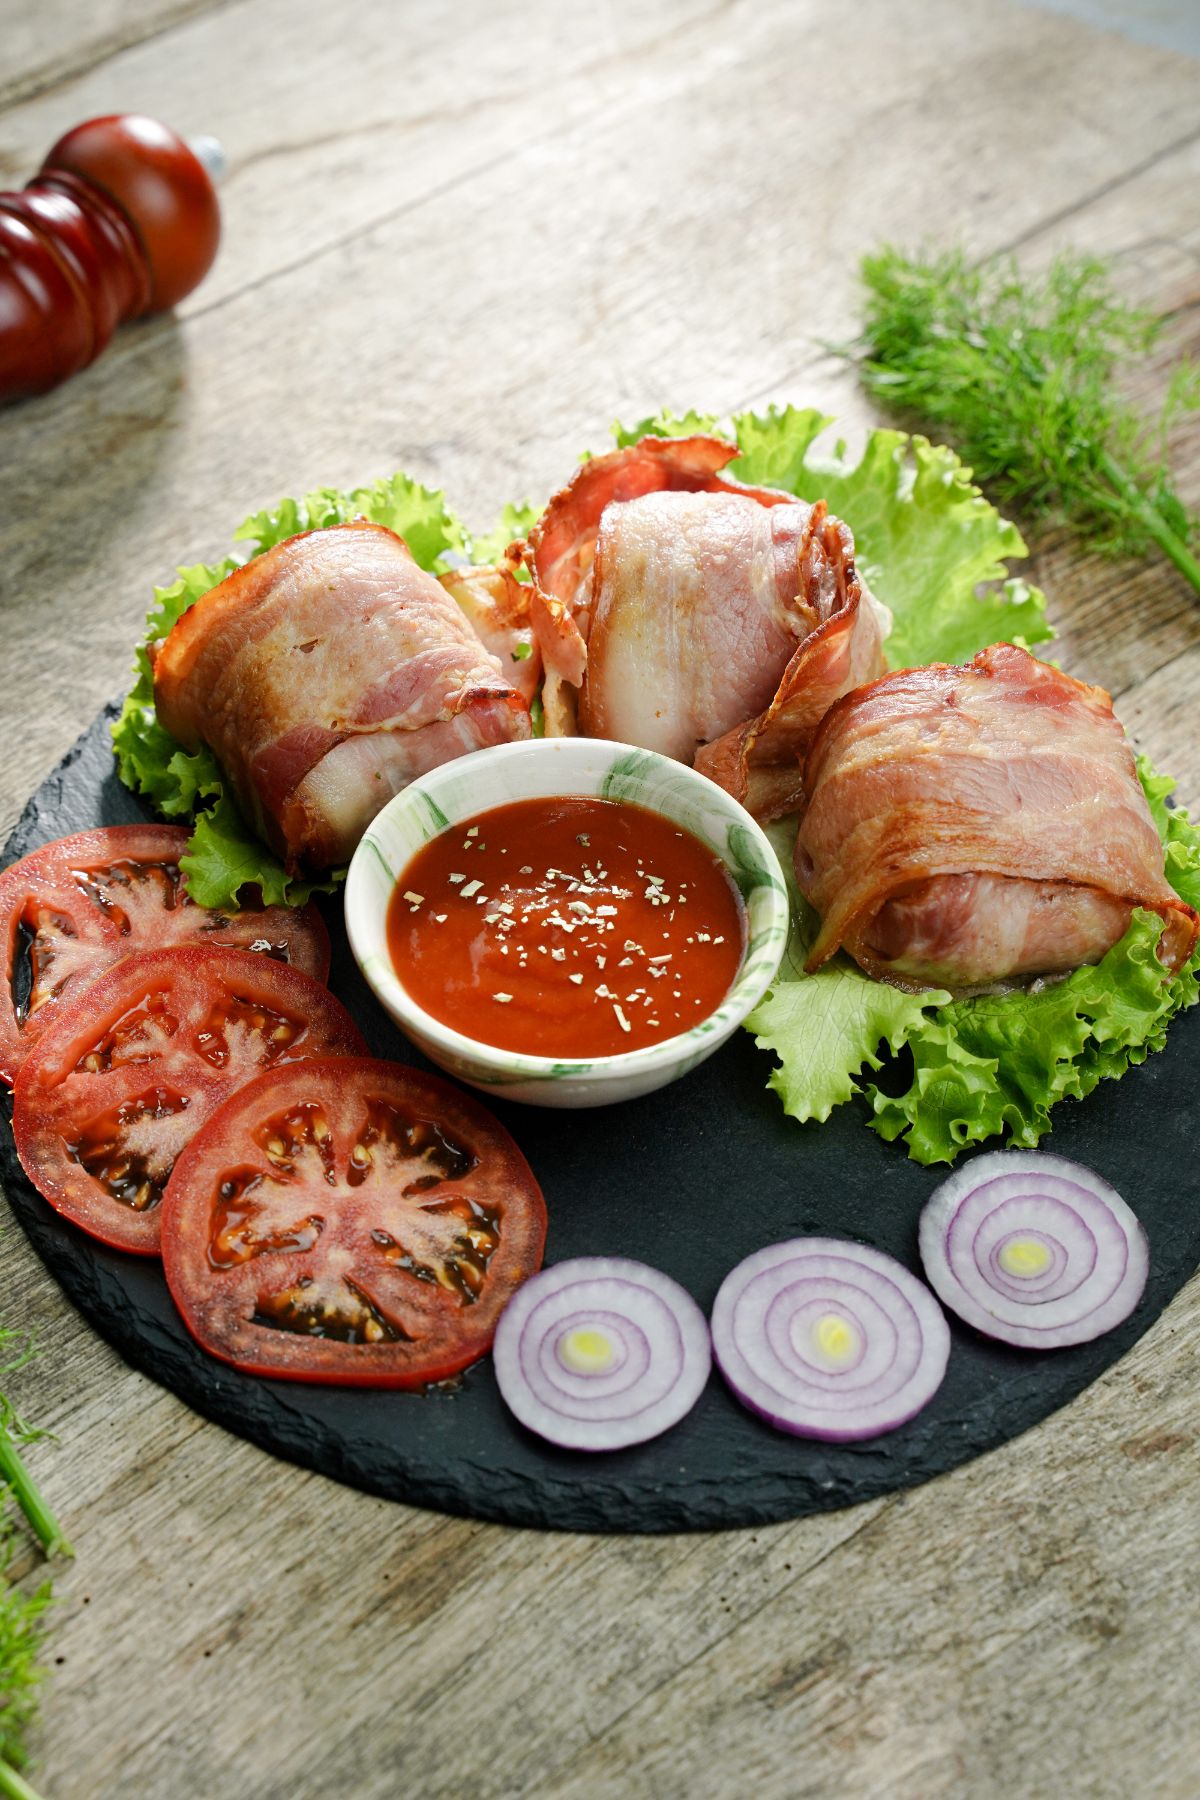 black plate of meatballs with lettuce onion tomato and ketchup on wood table